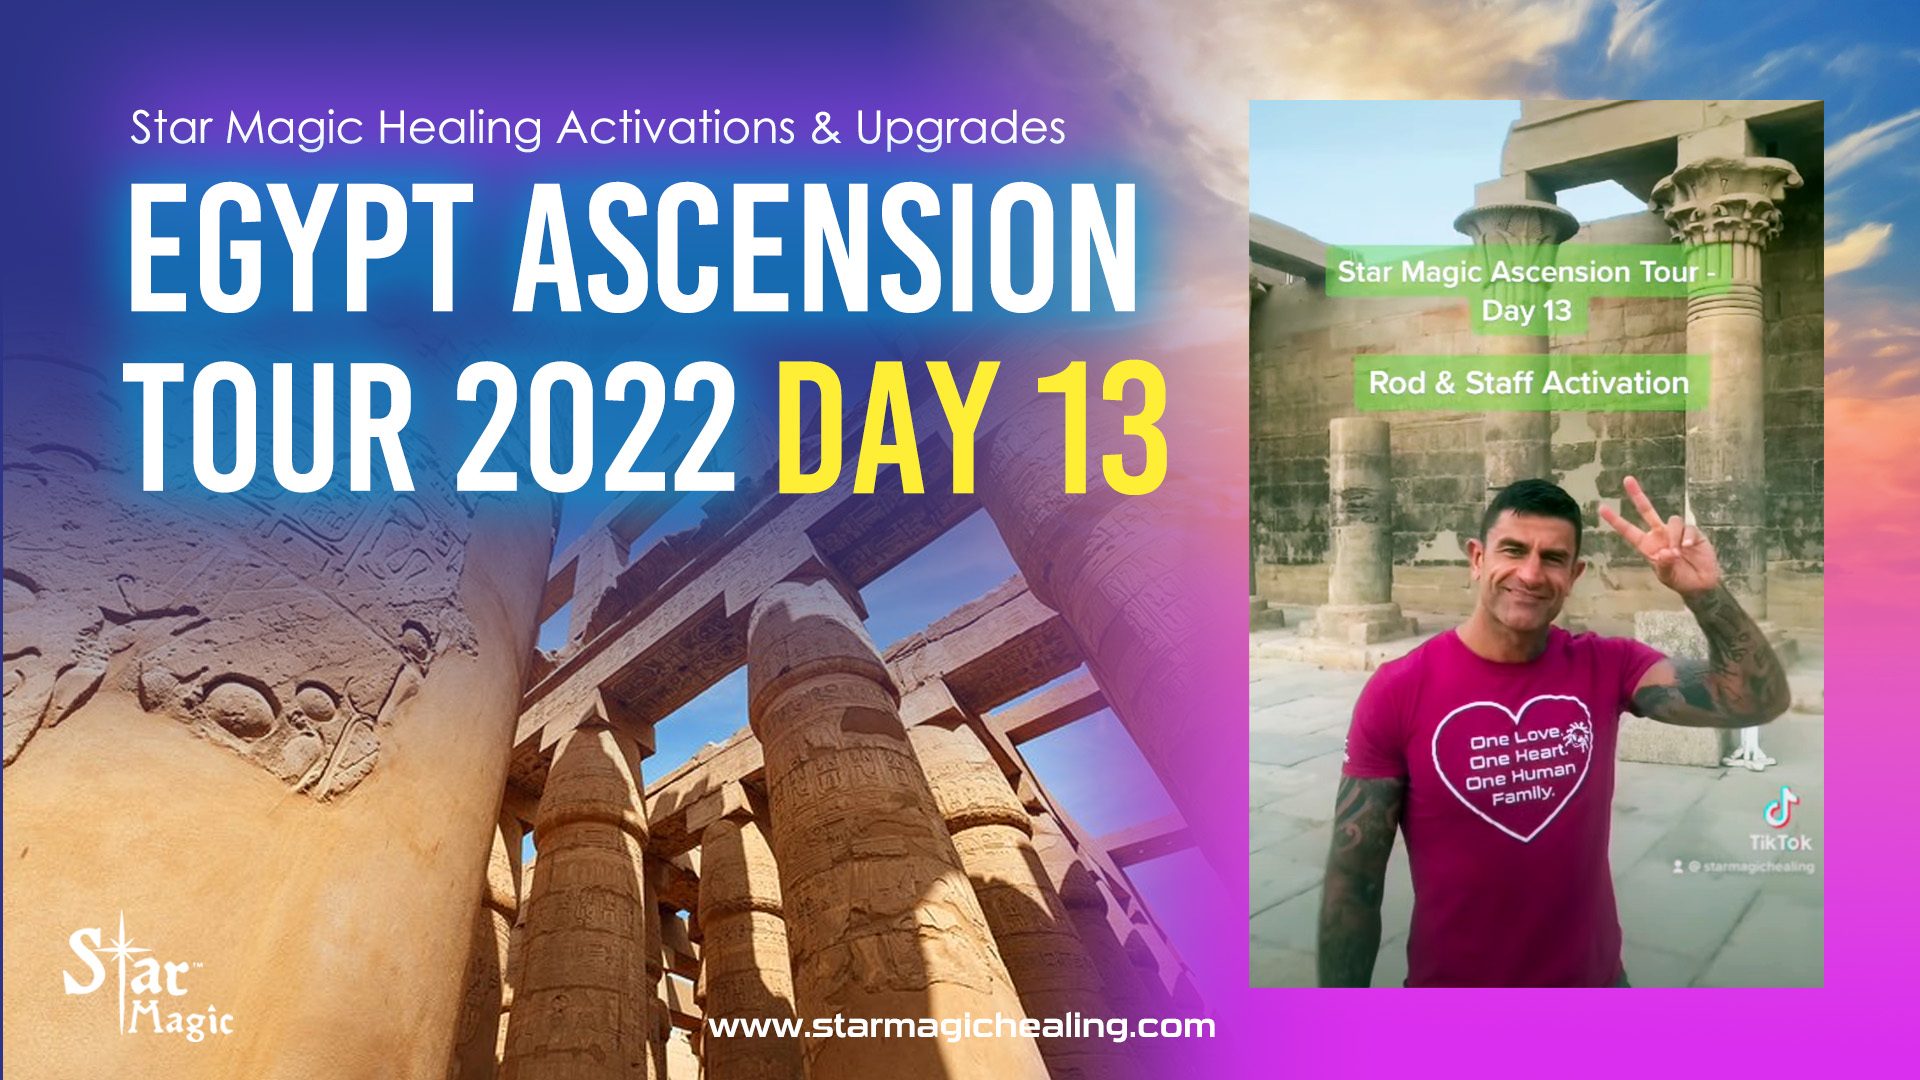 Star Magic Egypt Ascension Tour Day 13 – Activations & Upgrades